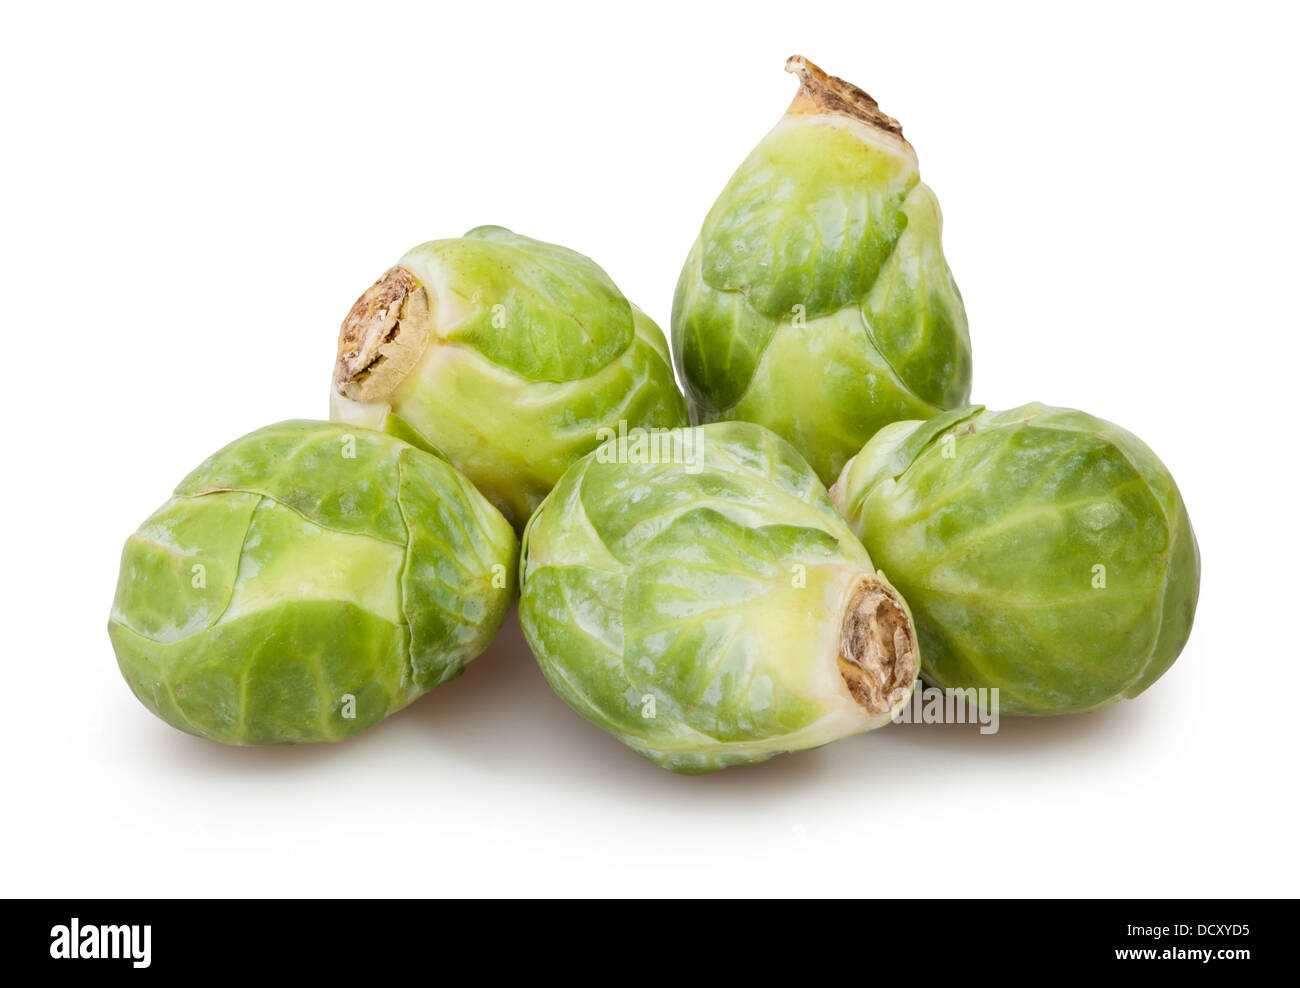 brussels sprouts group on white background Stock Photo